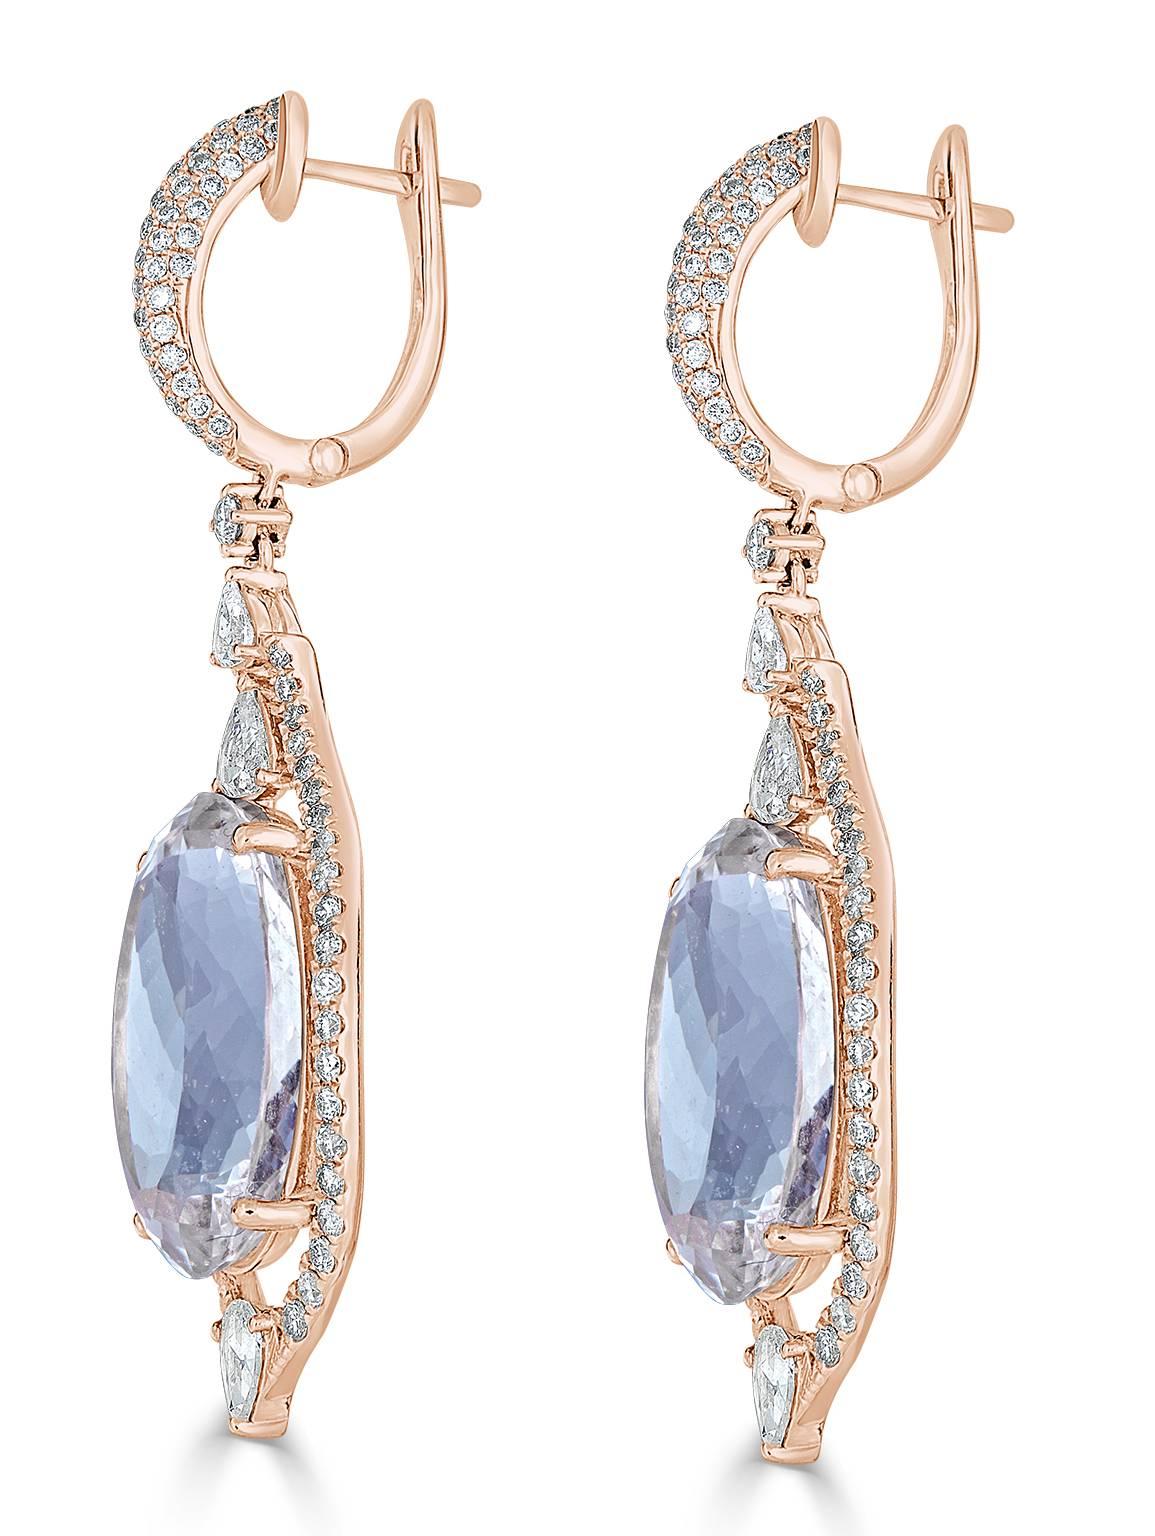 Simple elegance!  These fabulously charming Aquamarine drop earrings that are surrounded by 1.63 carats of white diamond pave all the way to the top of the earring have white pear shape diamonds sprinkled around the setting.  6 to be exact at